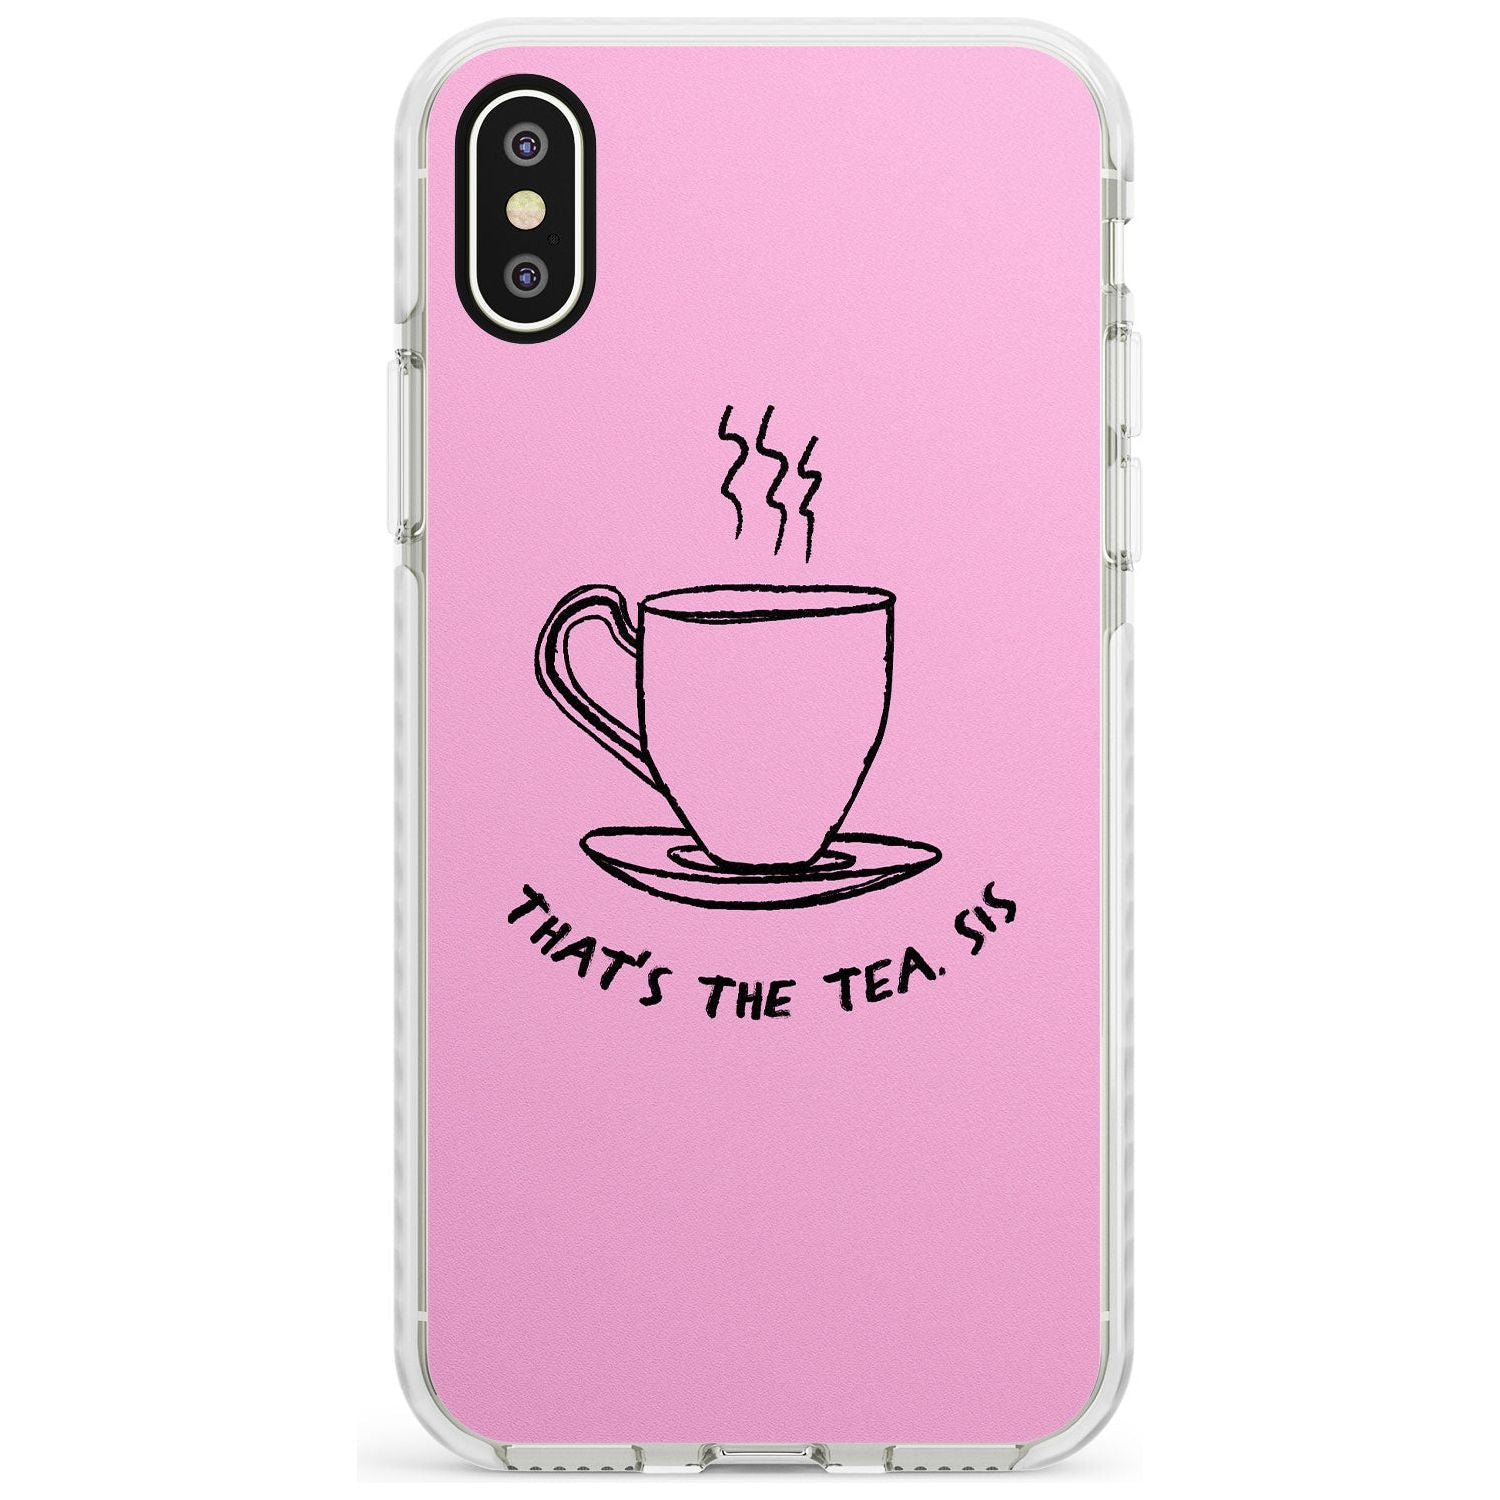 That's the Tea, Sis Pink Impact Phone Case for iPhone X XS Max XR